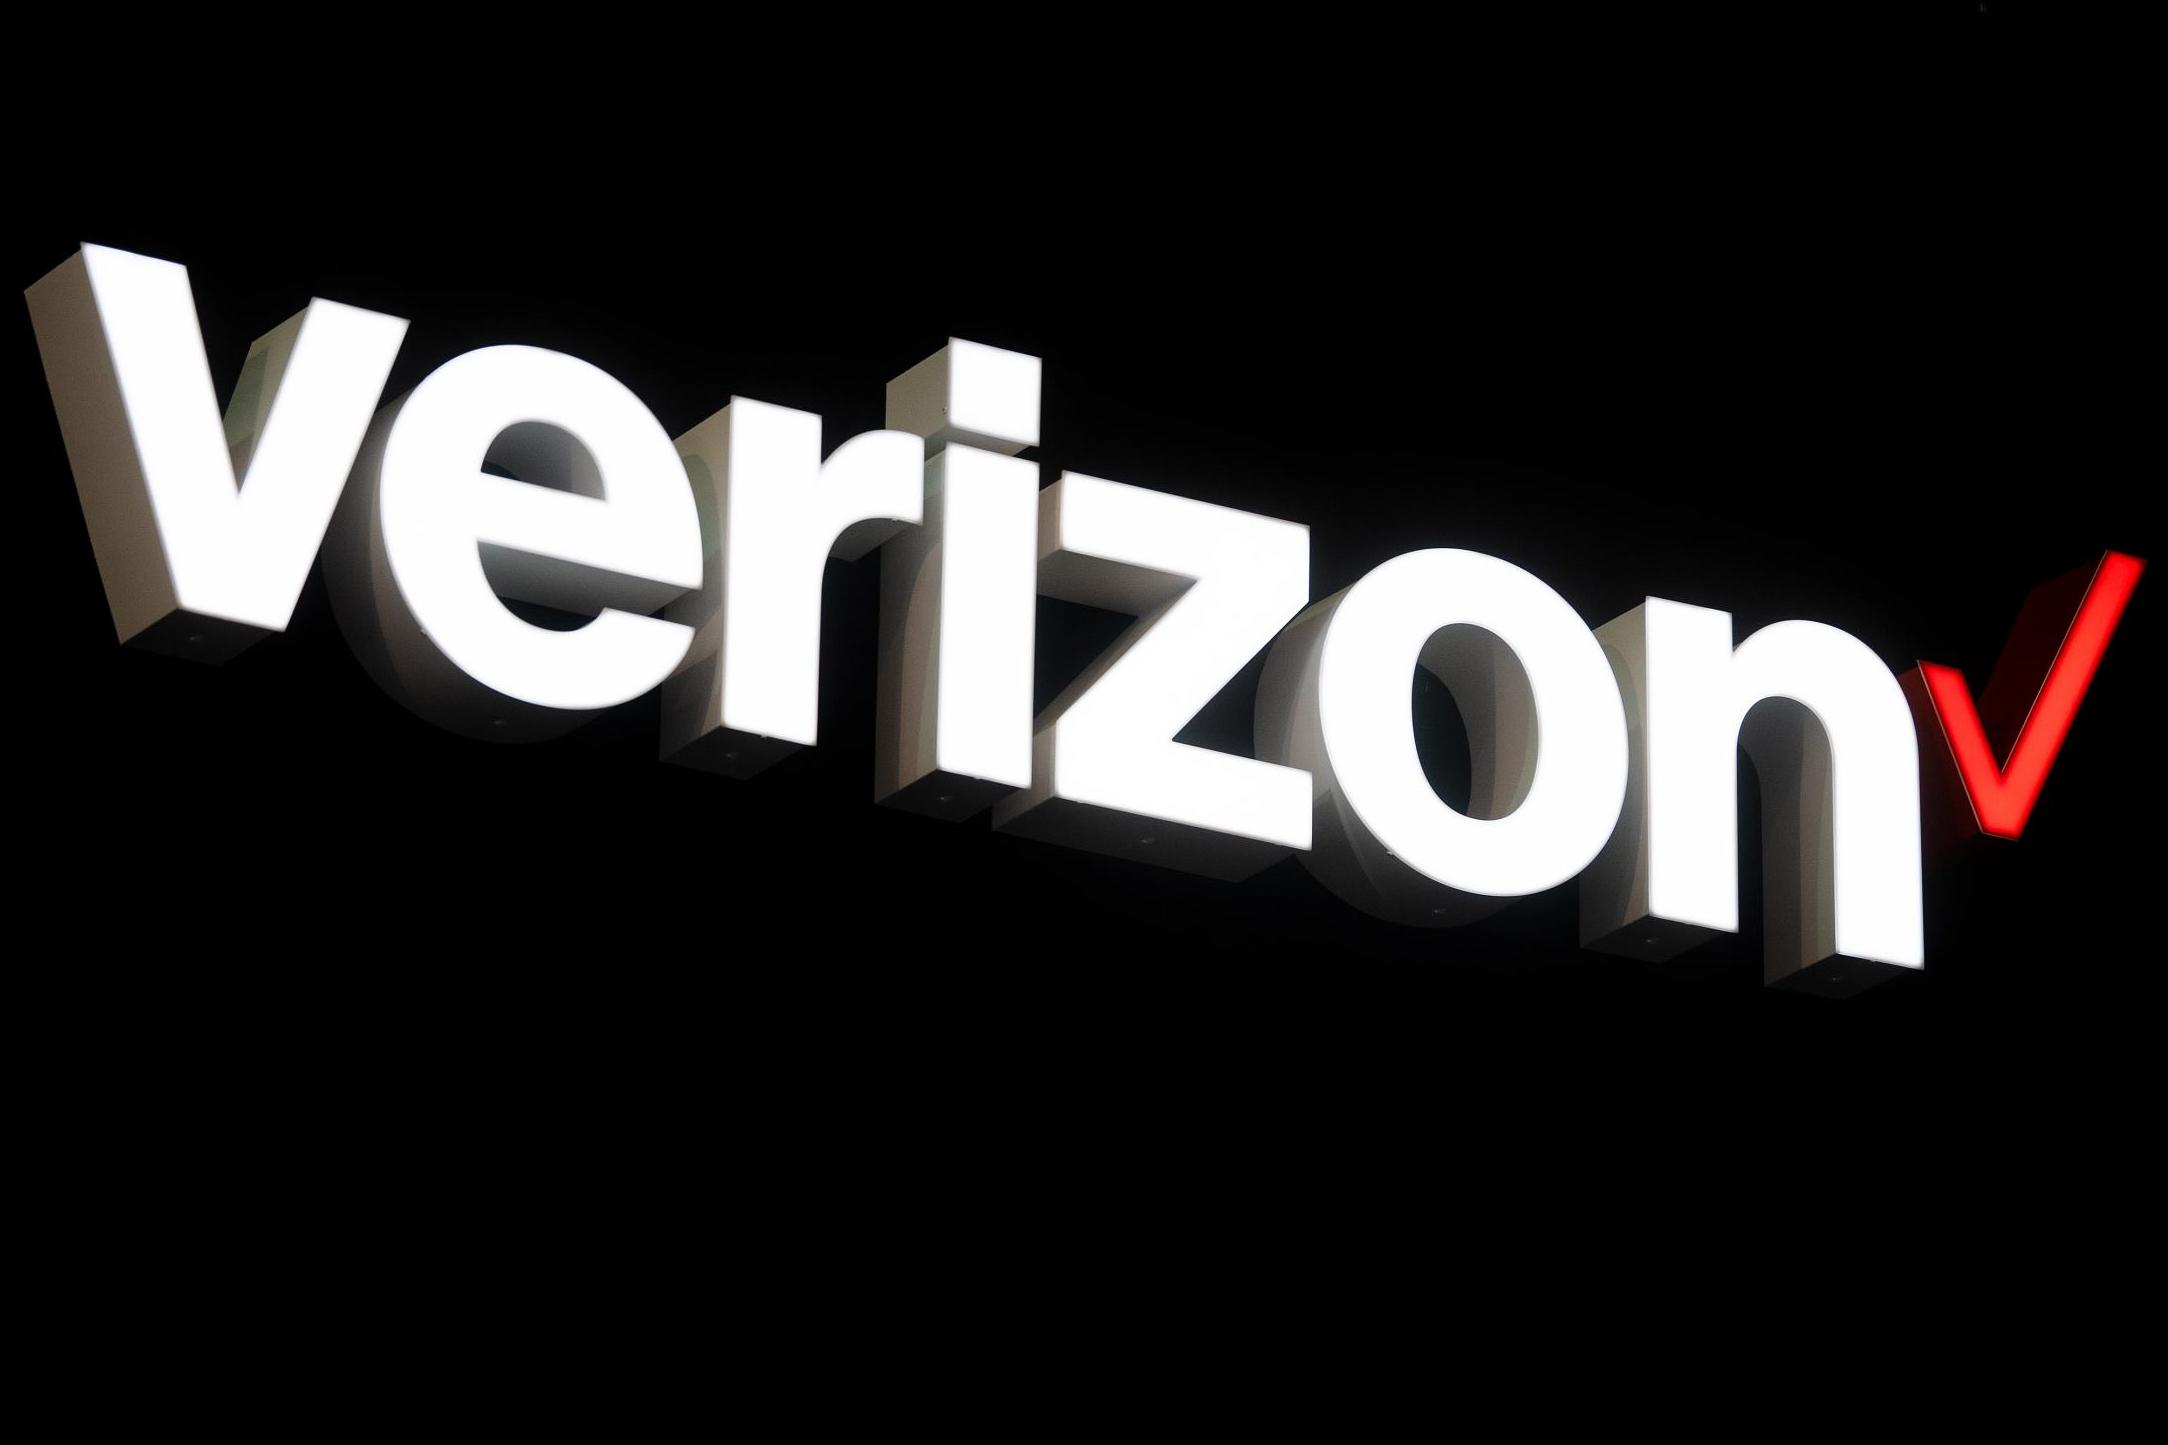 A logo sits illuminated outside the Verizon booth on day two of the GSMA Mobile World Congress 2019 on 26 February, 2019 in Barcelona, Spain.